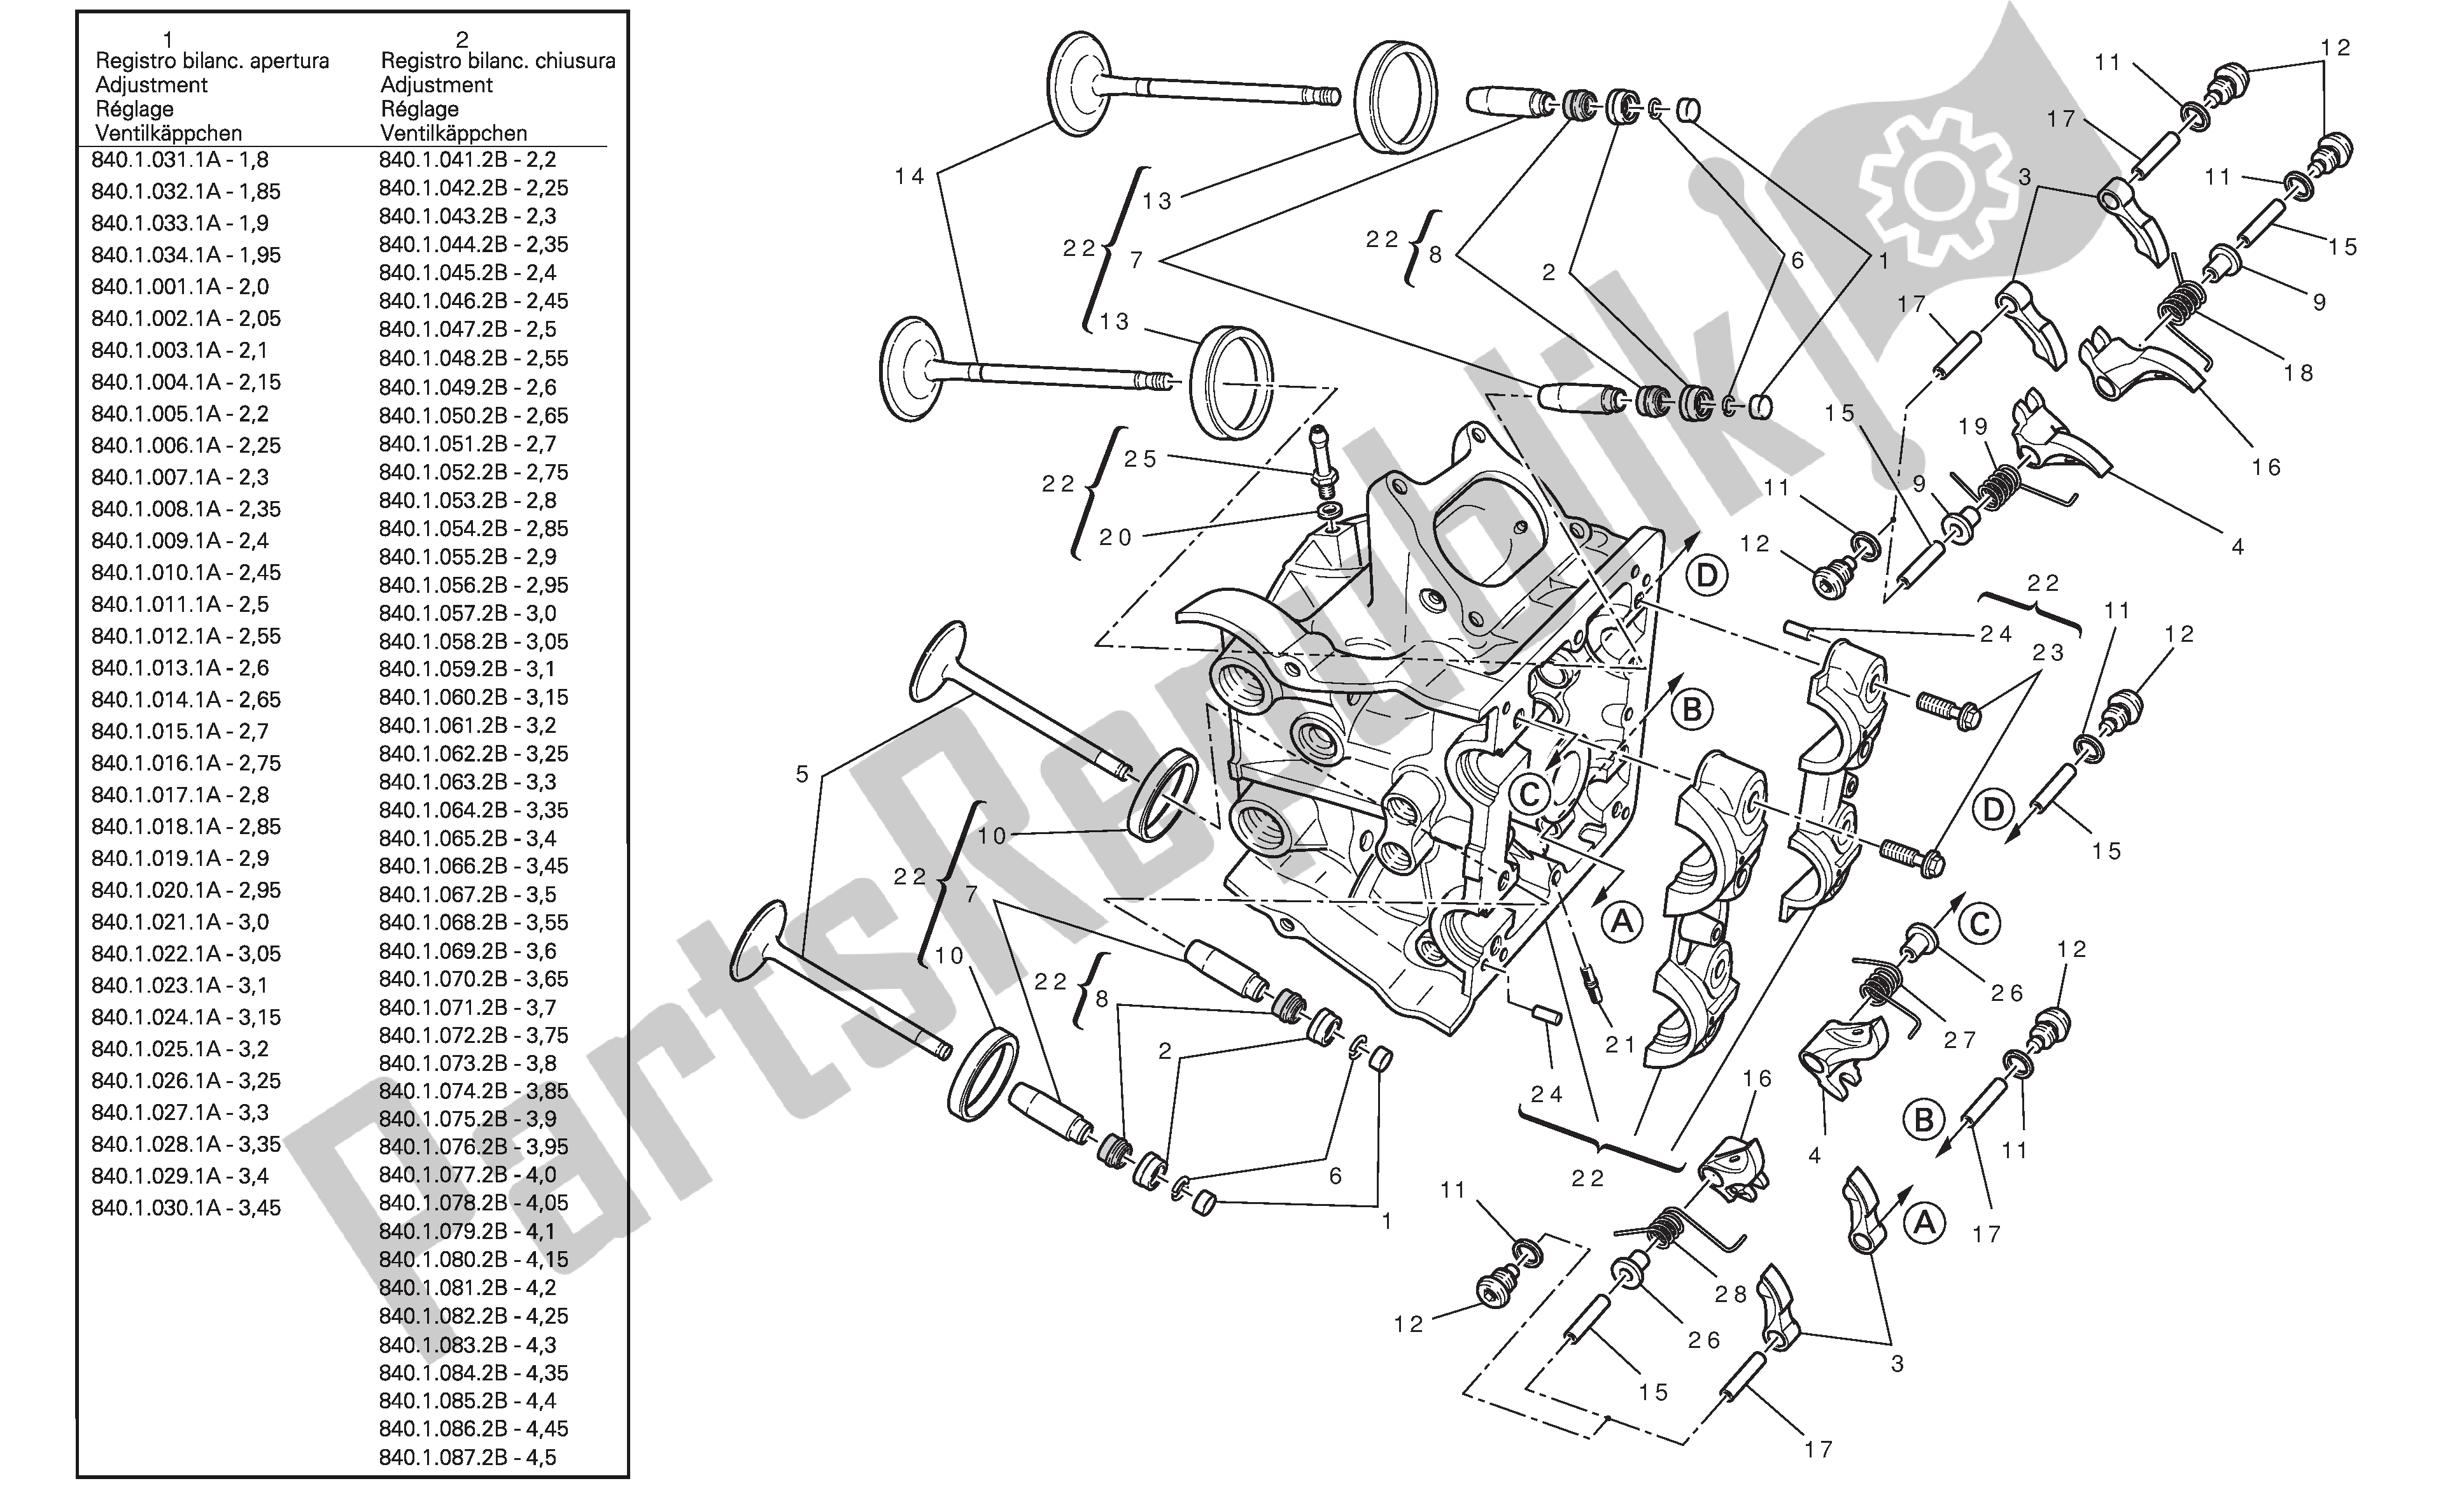 All parts for the Horizontalcylinder He Ad of the Ducati Streetfighter 848 2012